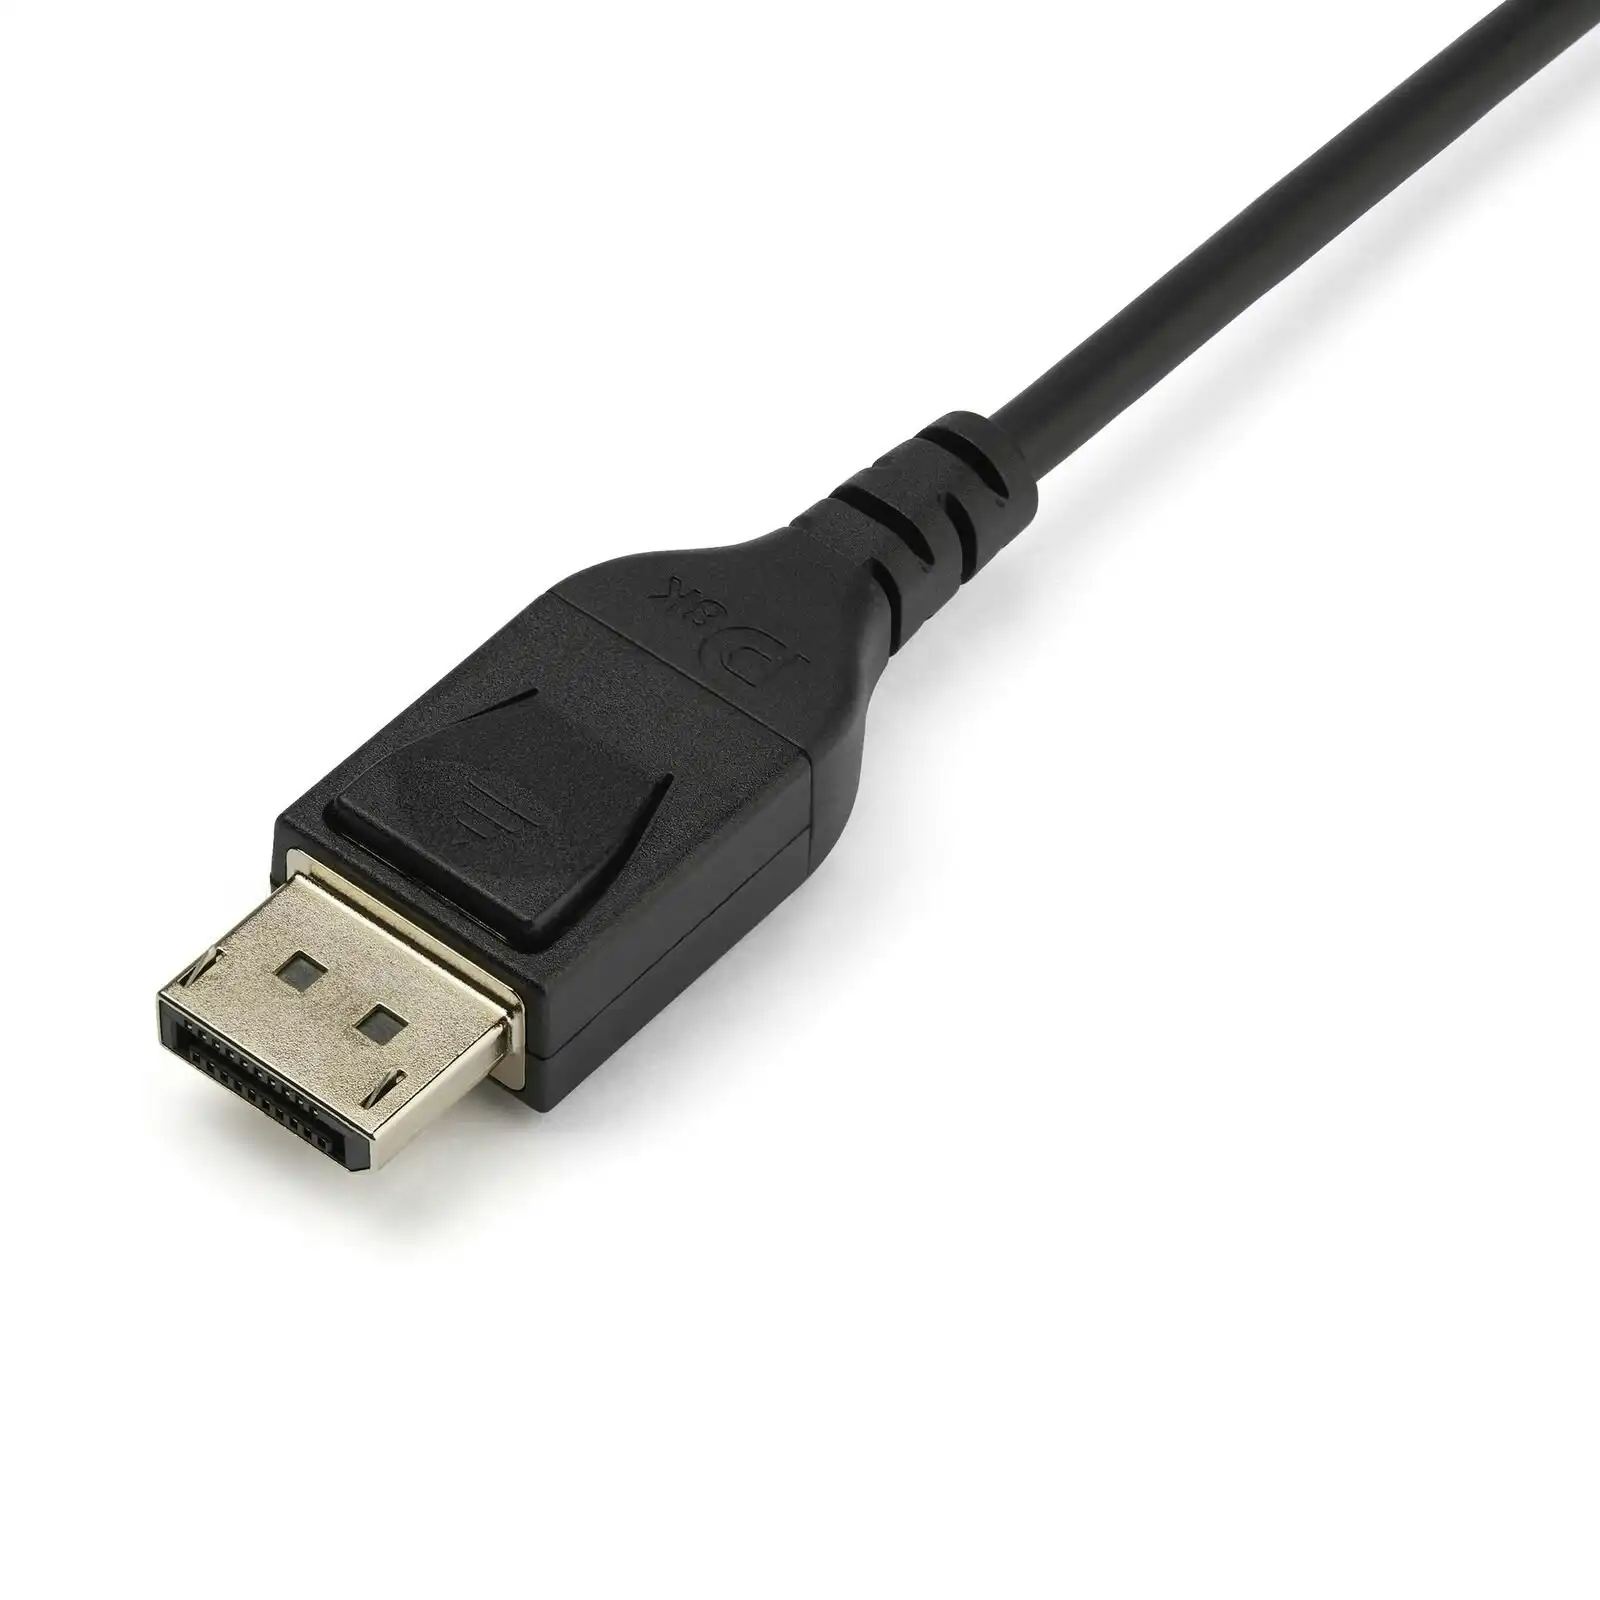 Star Tech DisplayPort Cable Black 2m HBR3 HDR MST 8K 120Hz 32.4Gbps Male To Male